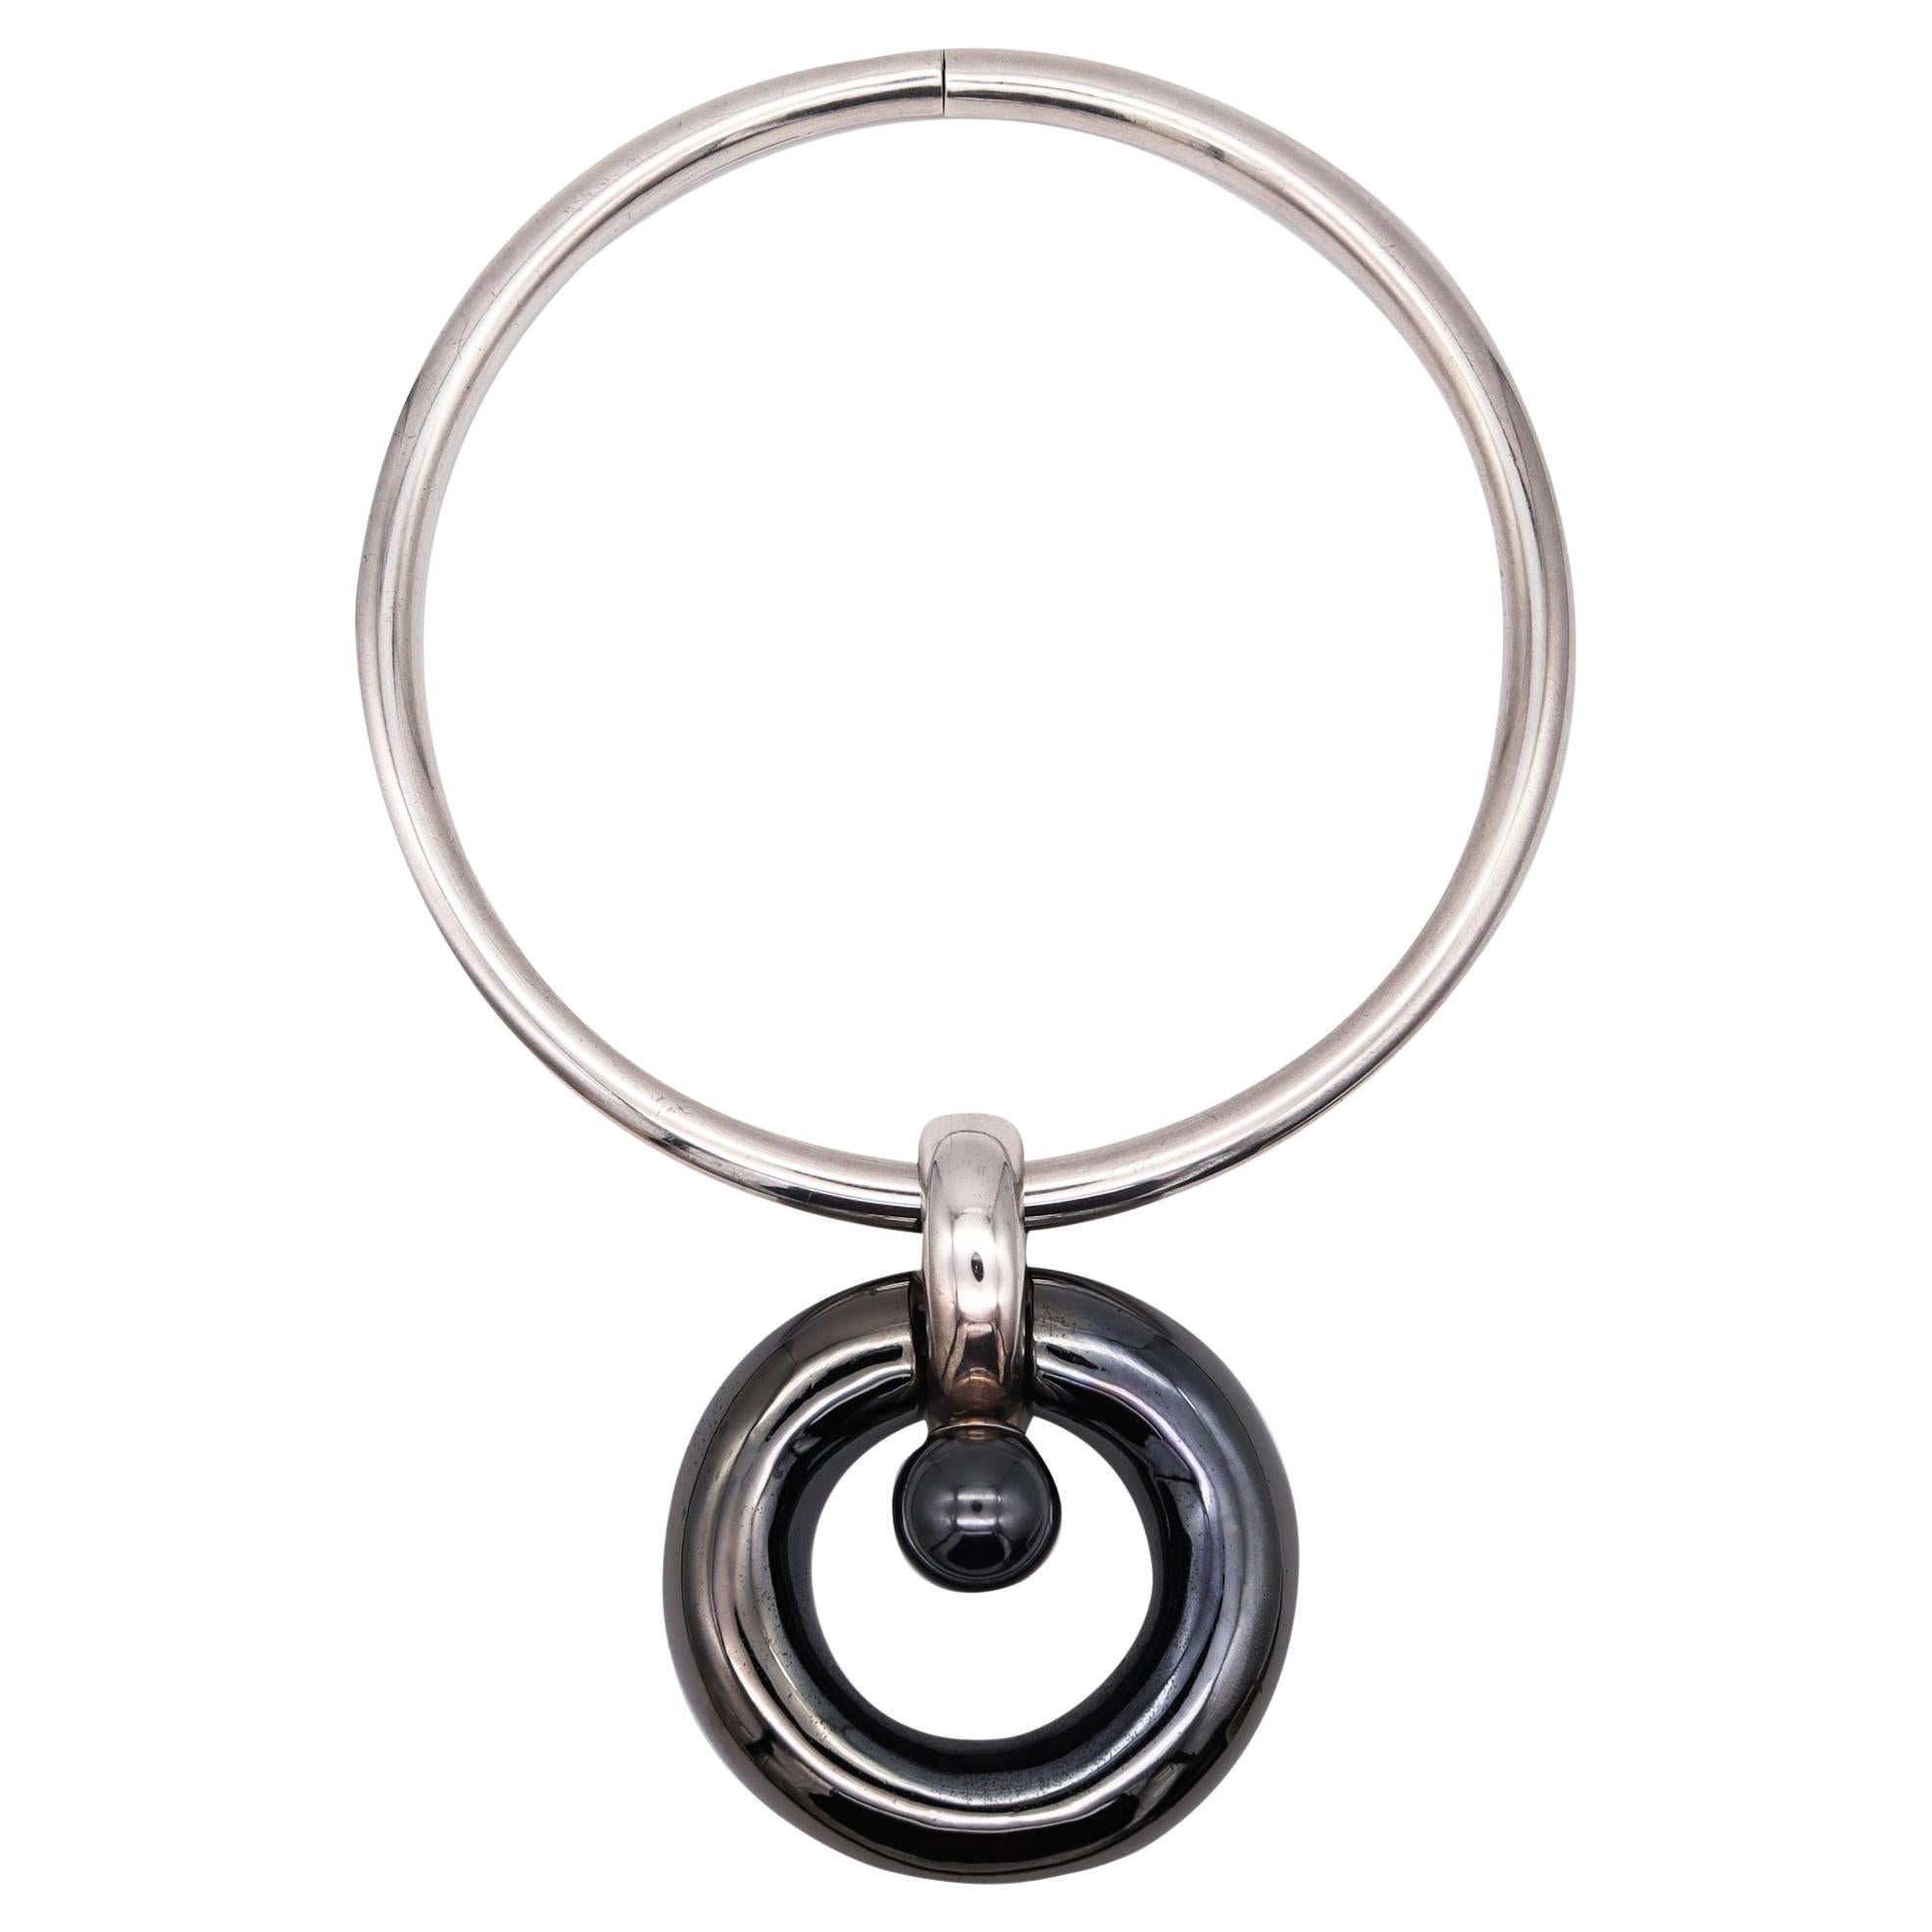 Takashi Wada Torque Geometric Necklace in Blackened Polished .925 SterlingSilver For Sale